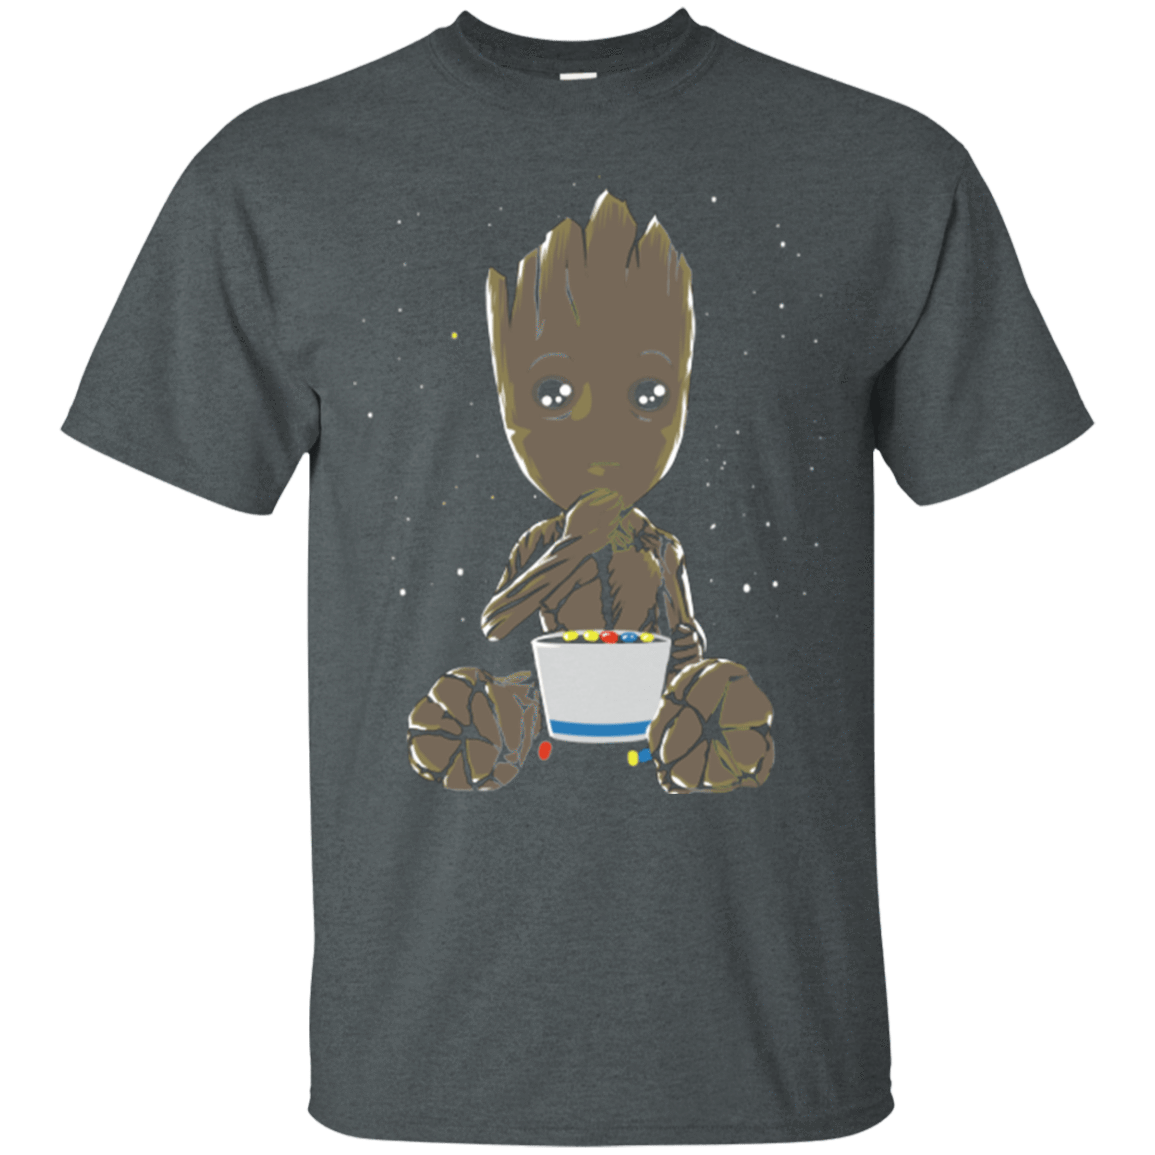 T-Shirts Dark Heather / Small Eating Candies T-Shirt